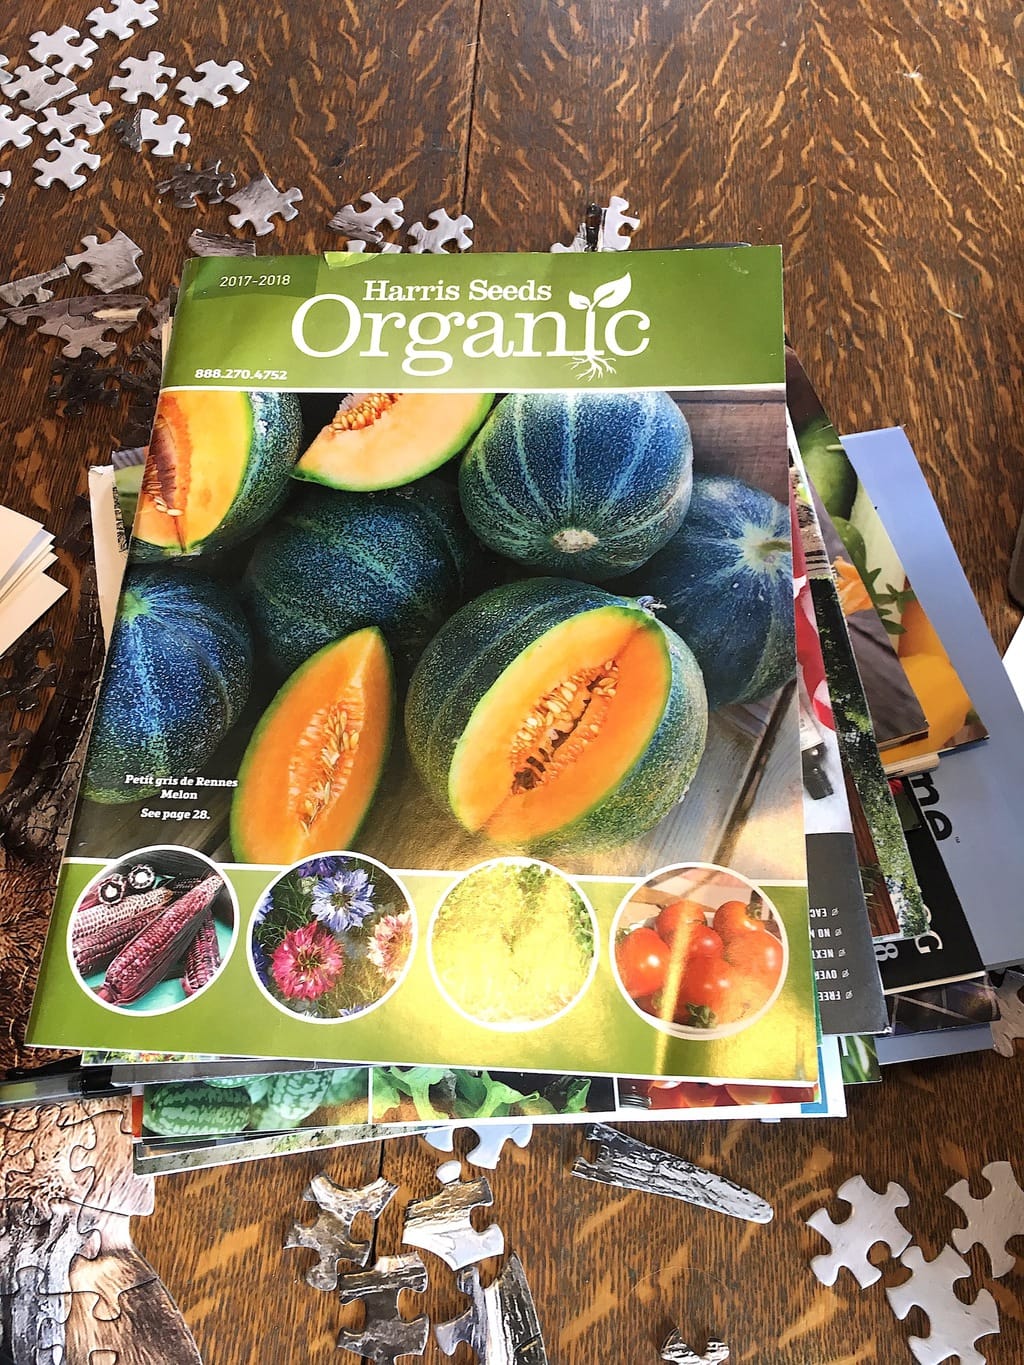 At the biodynamic and organic farm-to-table restaurant Black Cat Bistro in Boulder, Colorado seed catalogues are important.